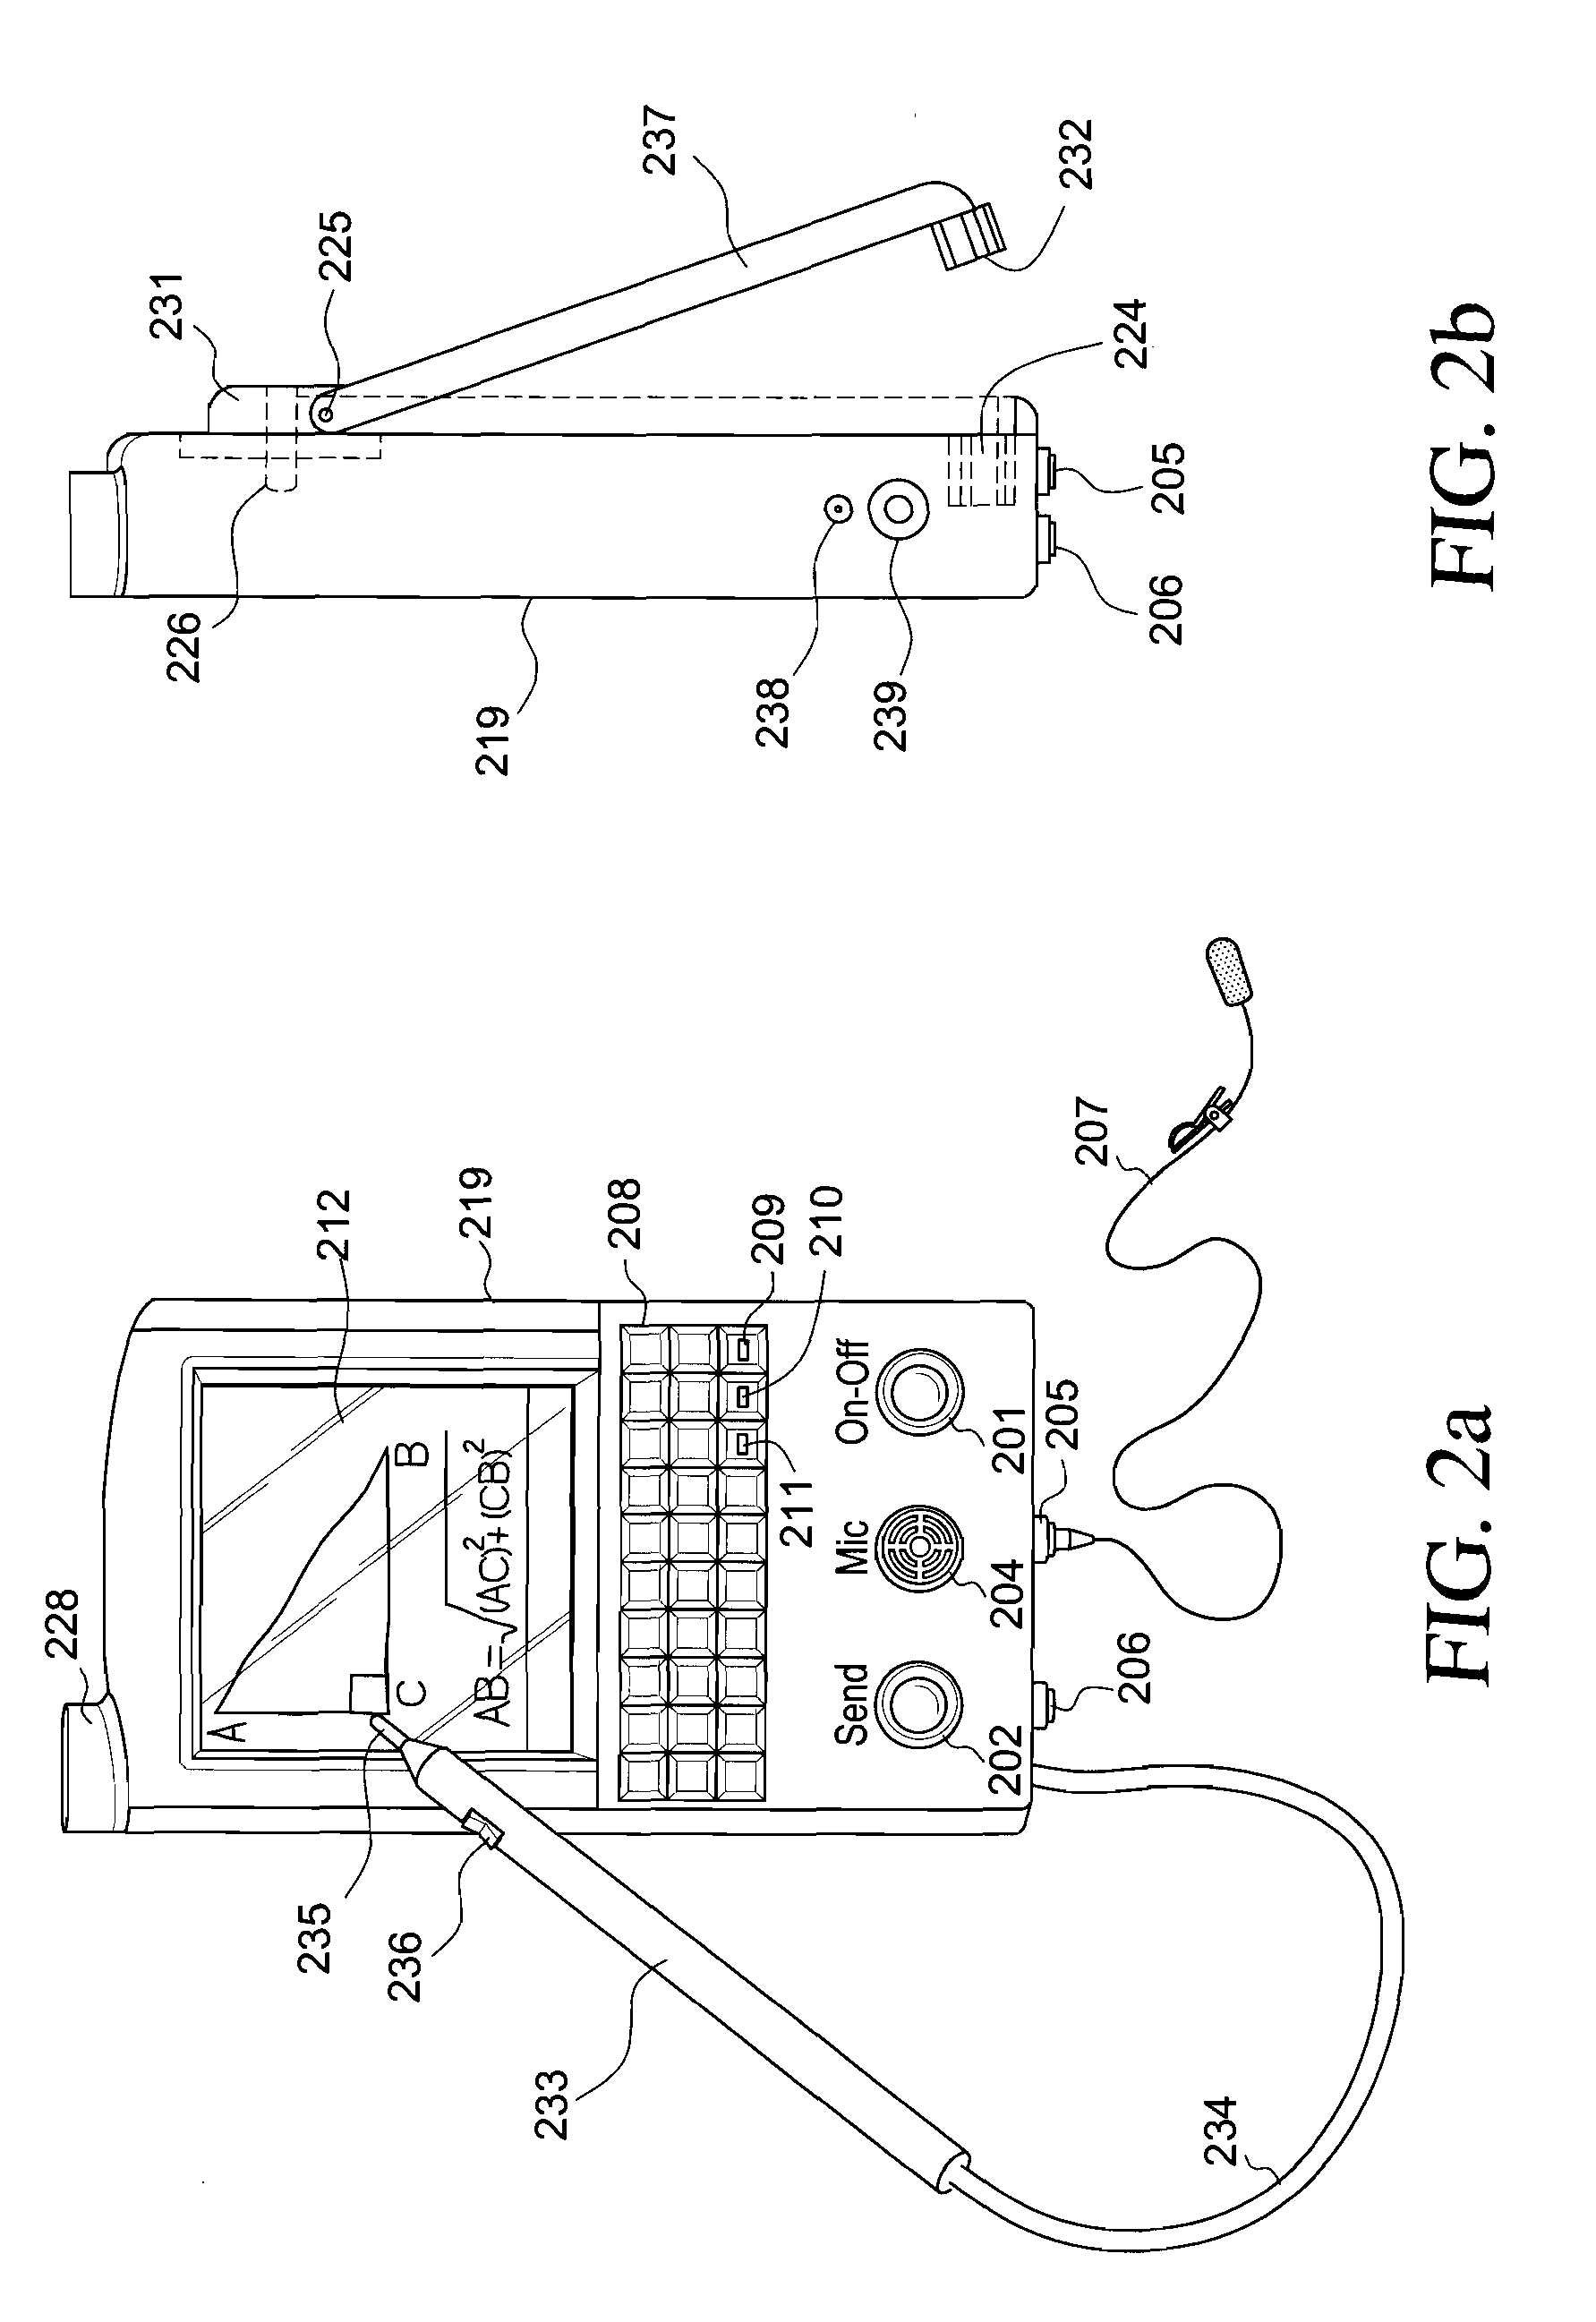 Multimode recording and transmitting apparatus and its use in an interactive group response system